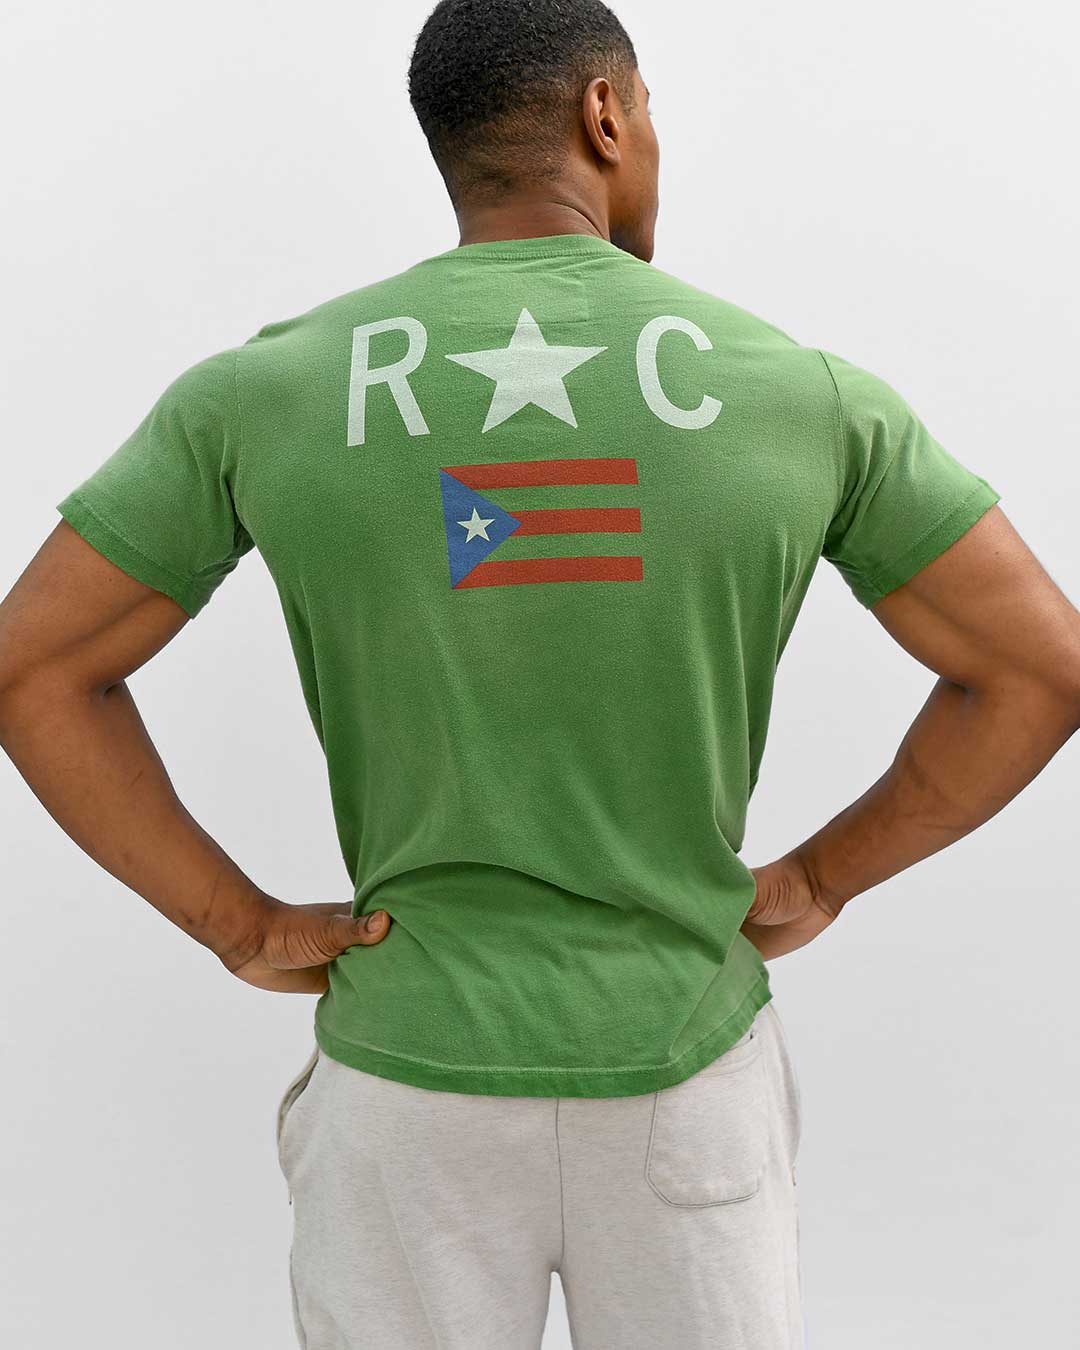 HHT - Clemente Heritage Green Tee - Roots of Fight